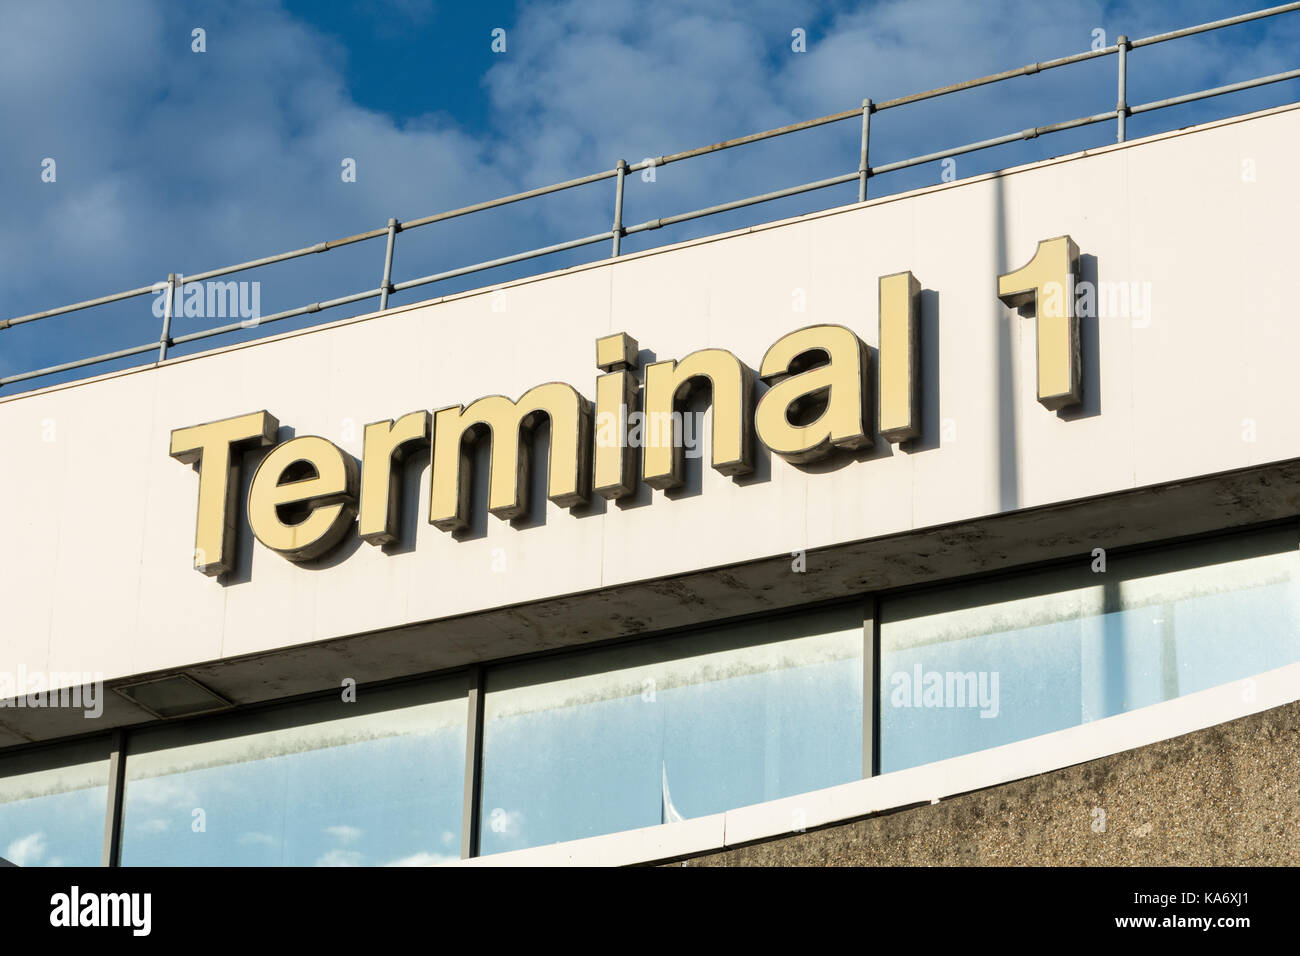 The now disused Terminal 1 building at Heathrow Airport, London, UK Stock Photo